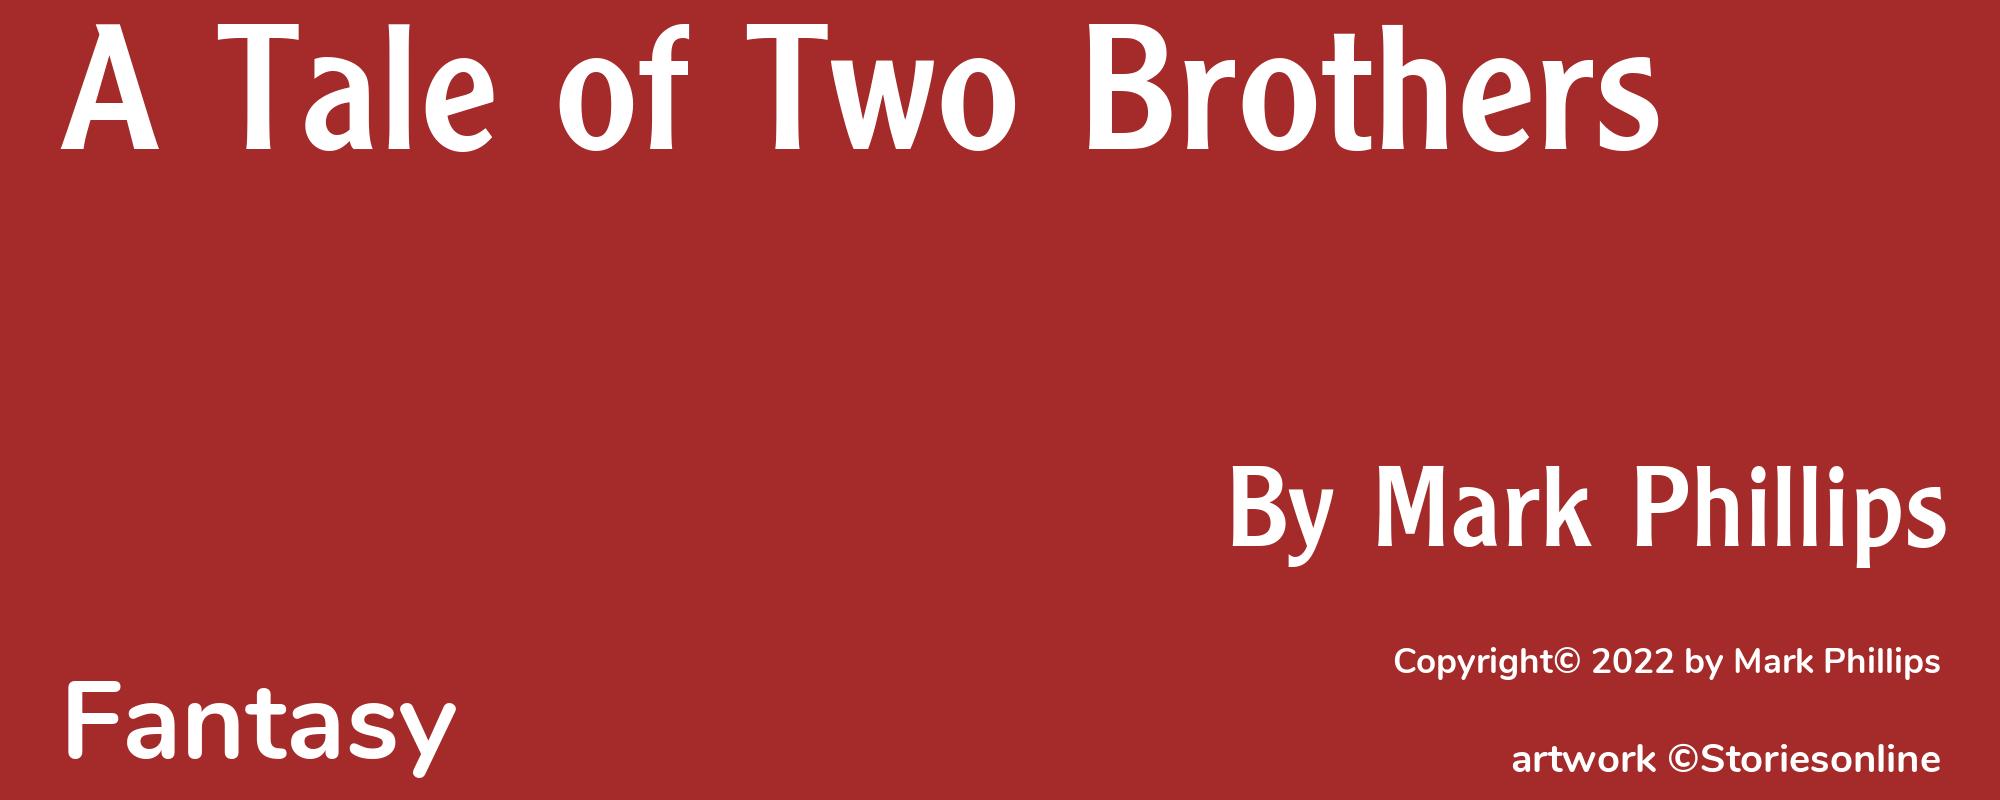 A Tale of Two Brothers - Cover